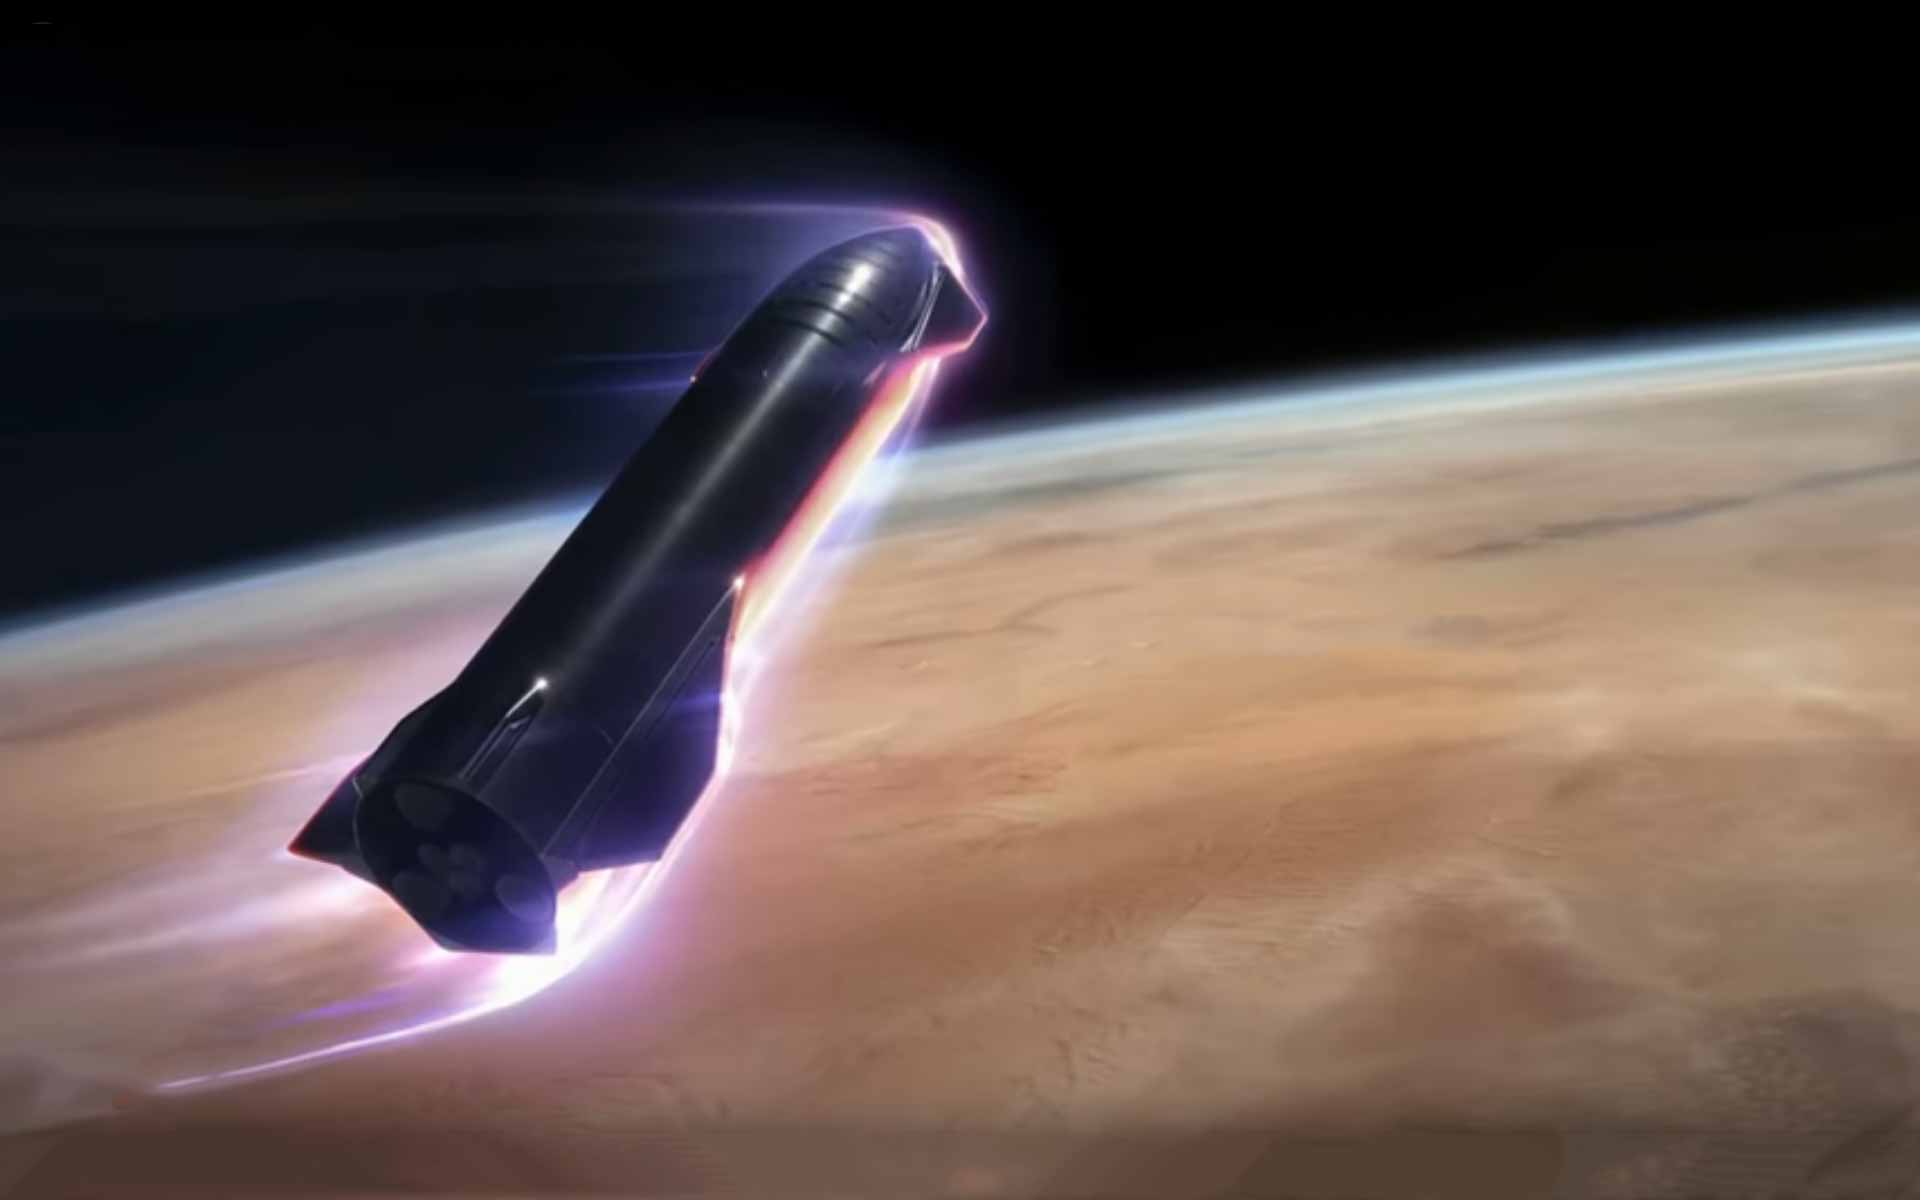 Earth to Mars in 100 days: The power of nuclear rockets